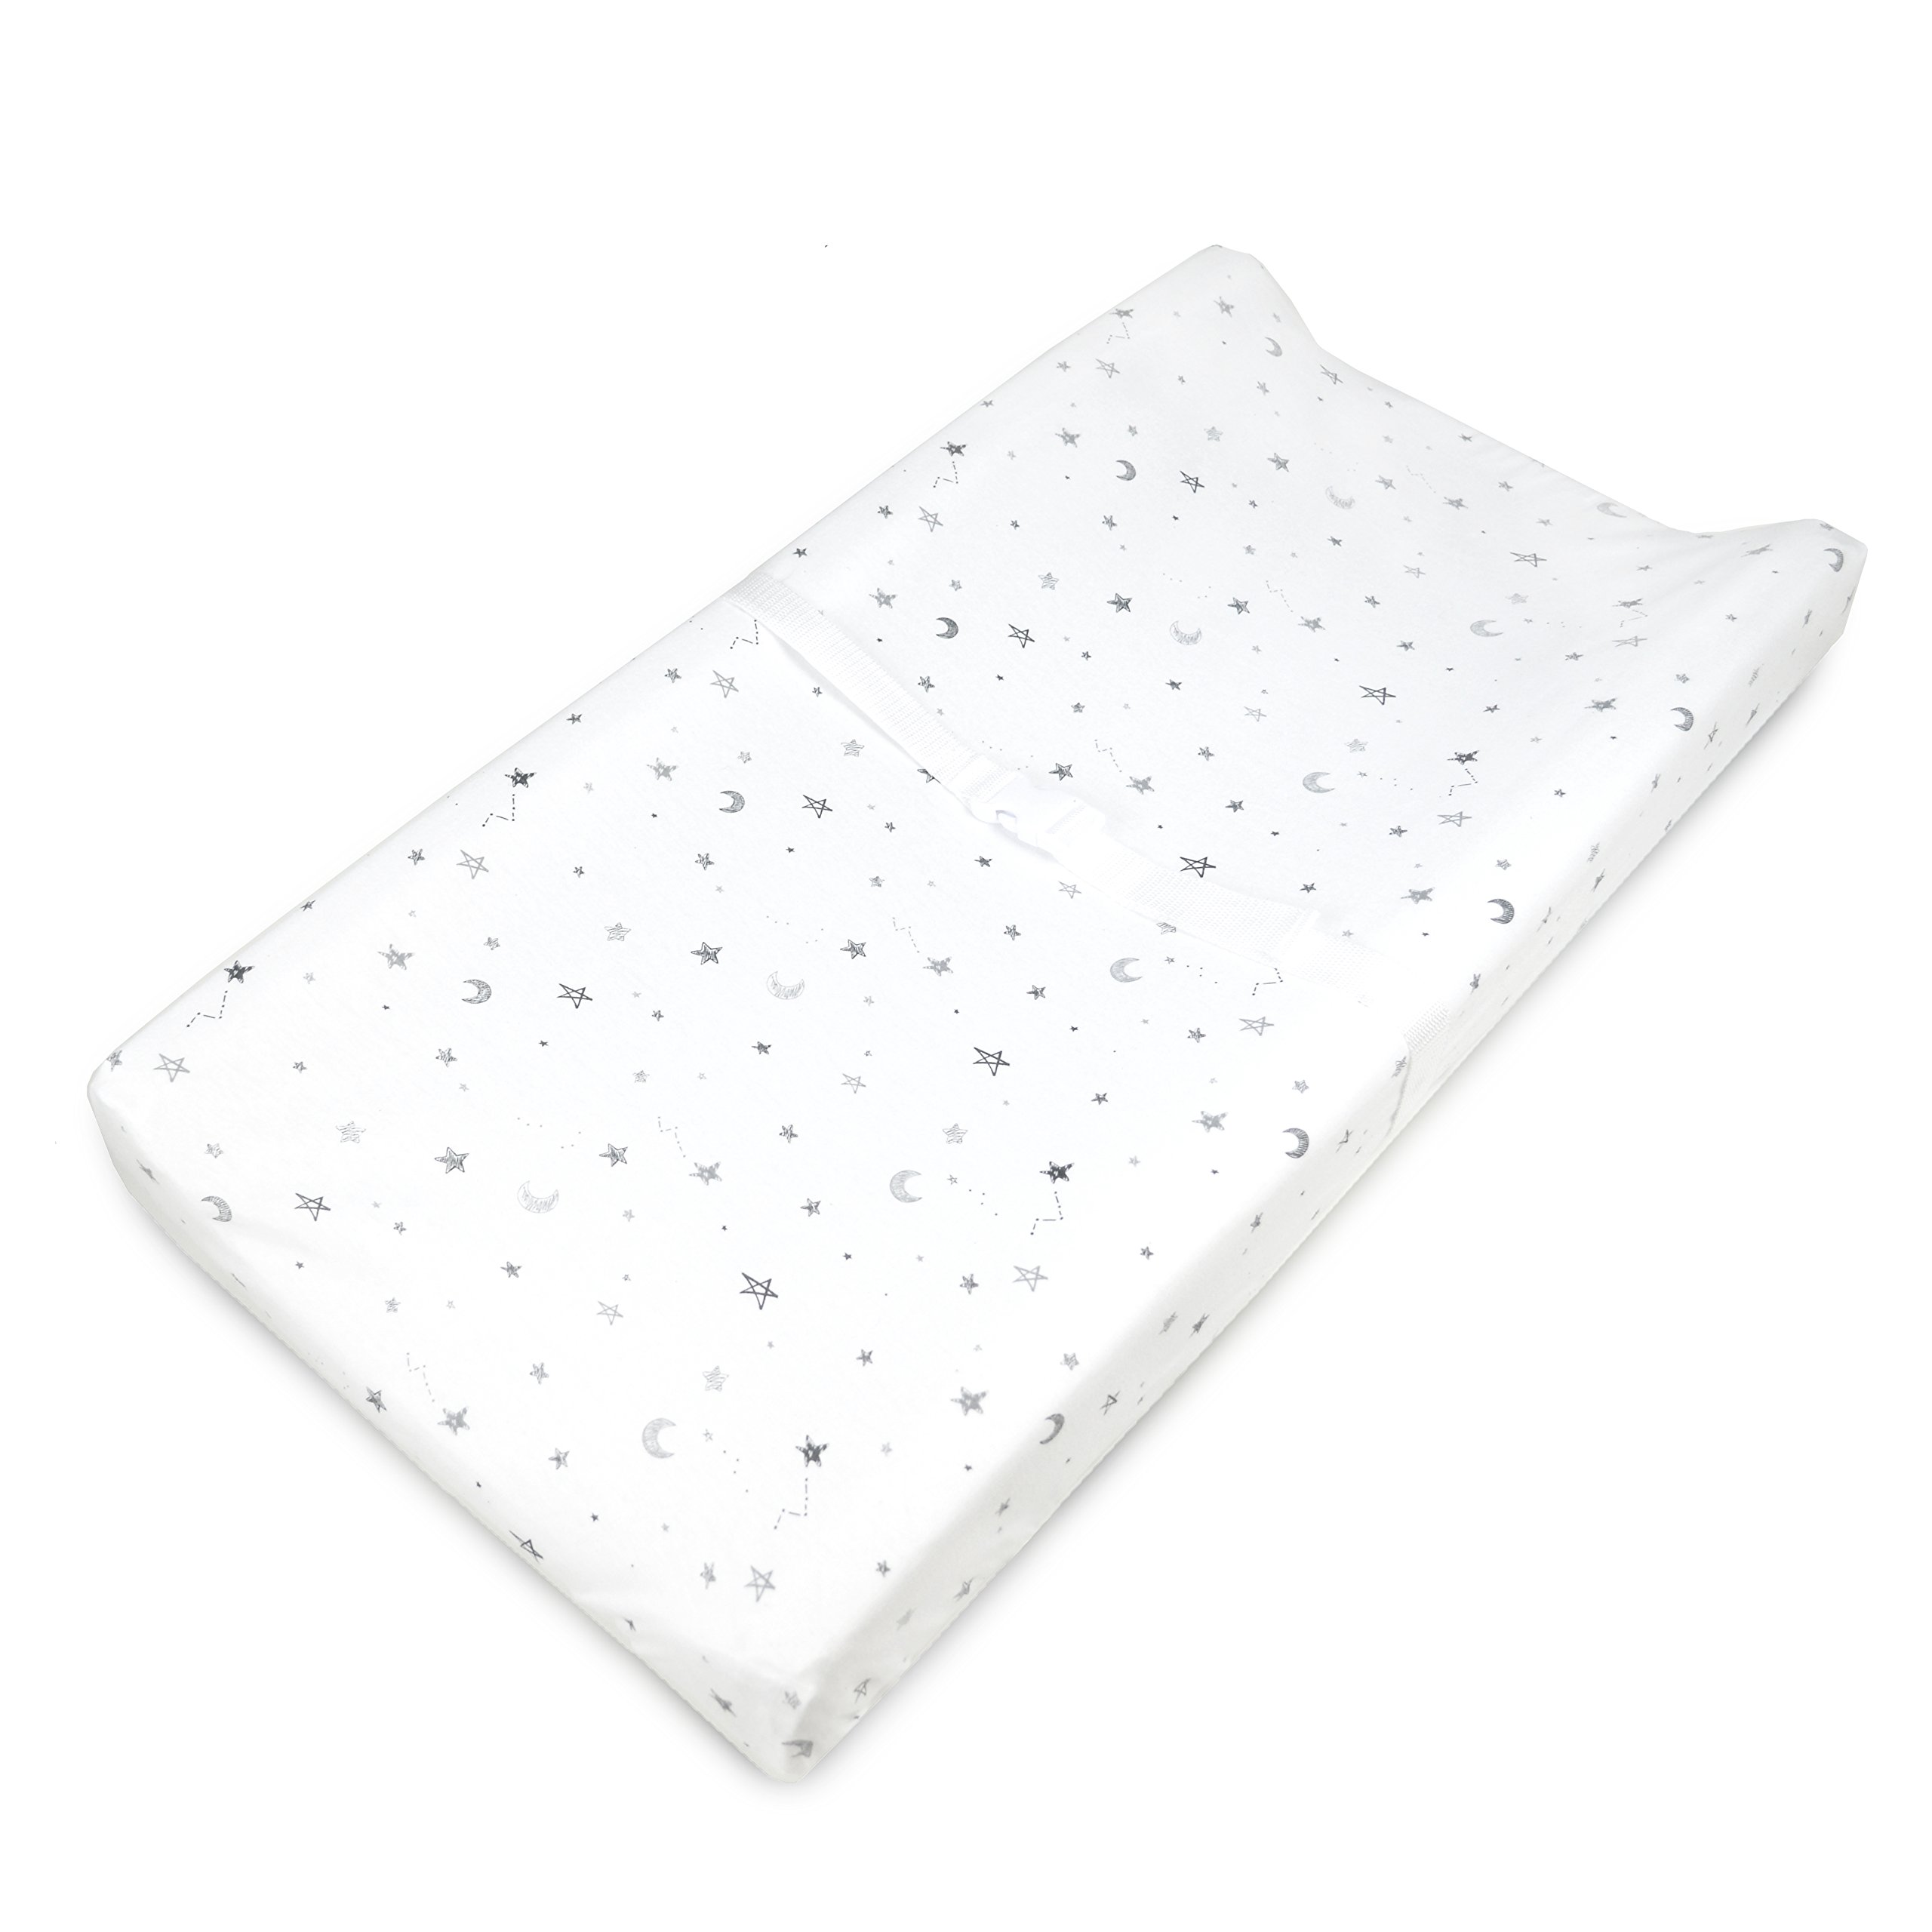 American Baby Company Printed 100% Cotton Knit Fitted Contoured Changing Table Pad Cover - Compatible with Mika Micky Bassinet, Gray Stars and Moons, for Boys and Girls